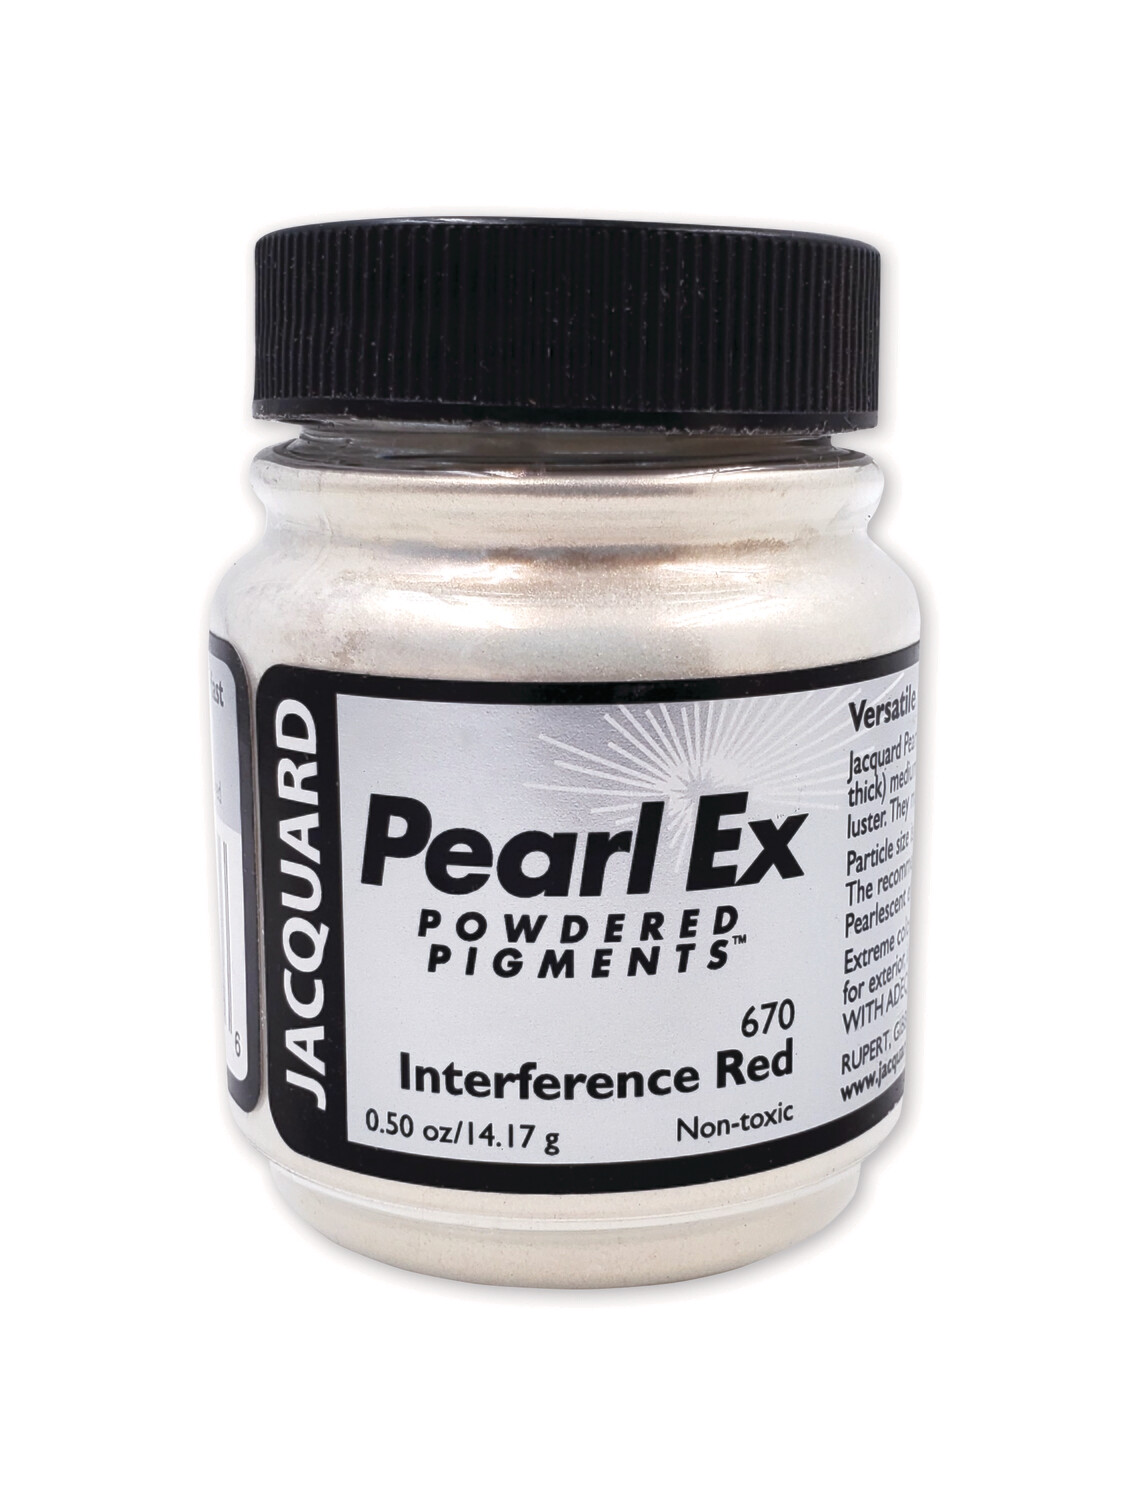 Pearl Ex Powdered Pigments-Intereferece Red